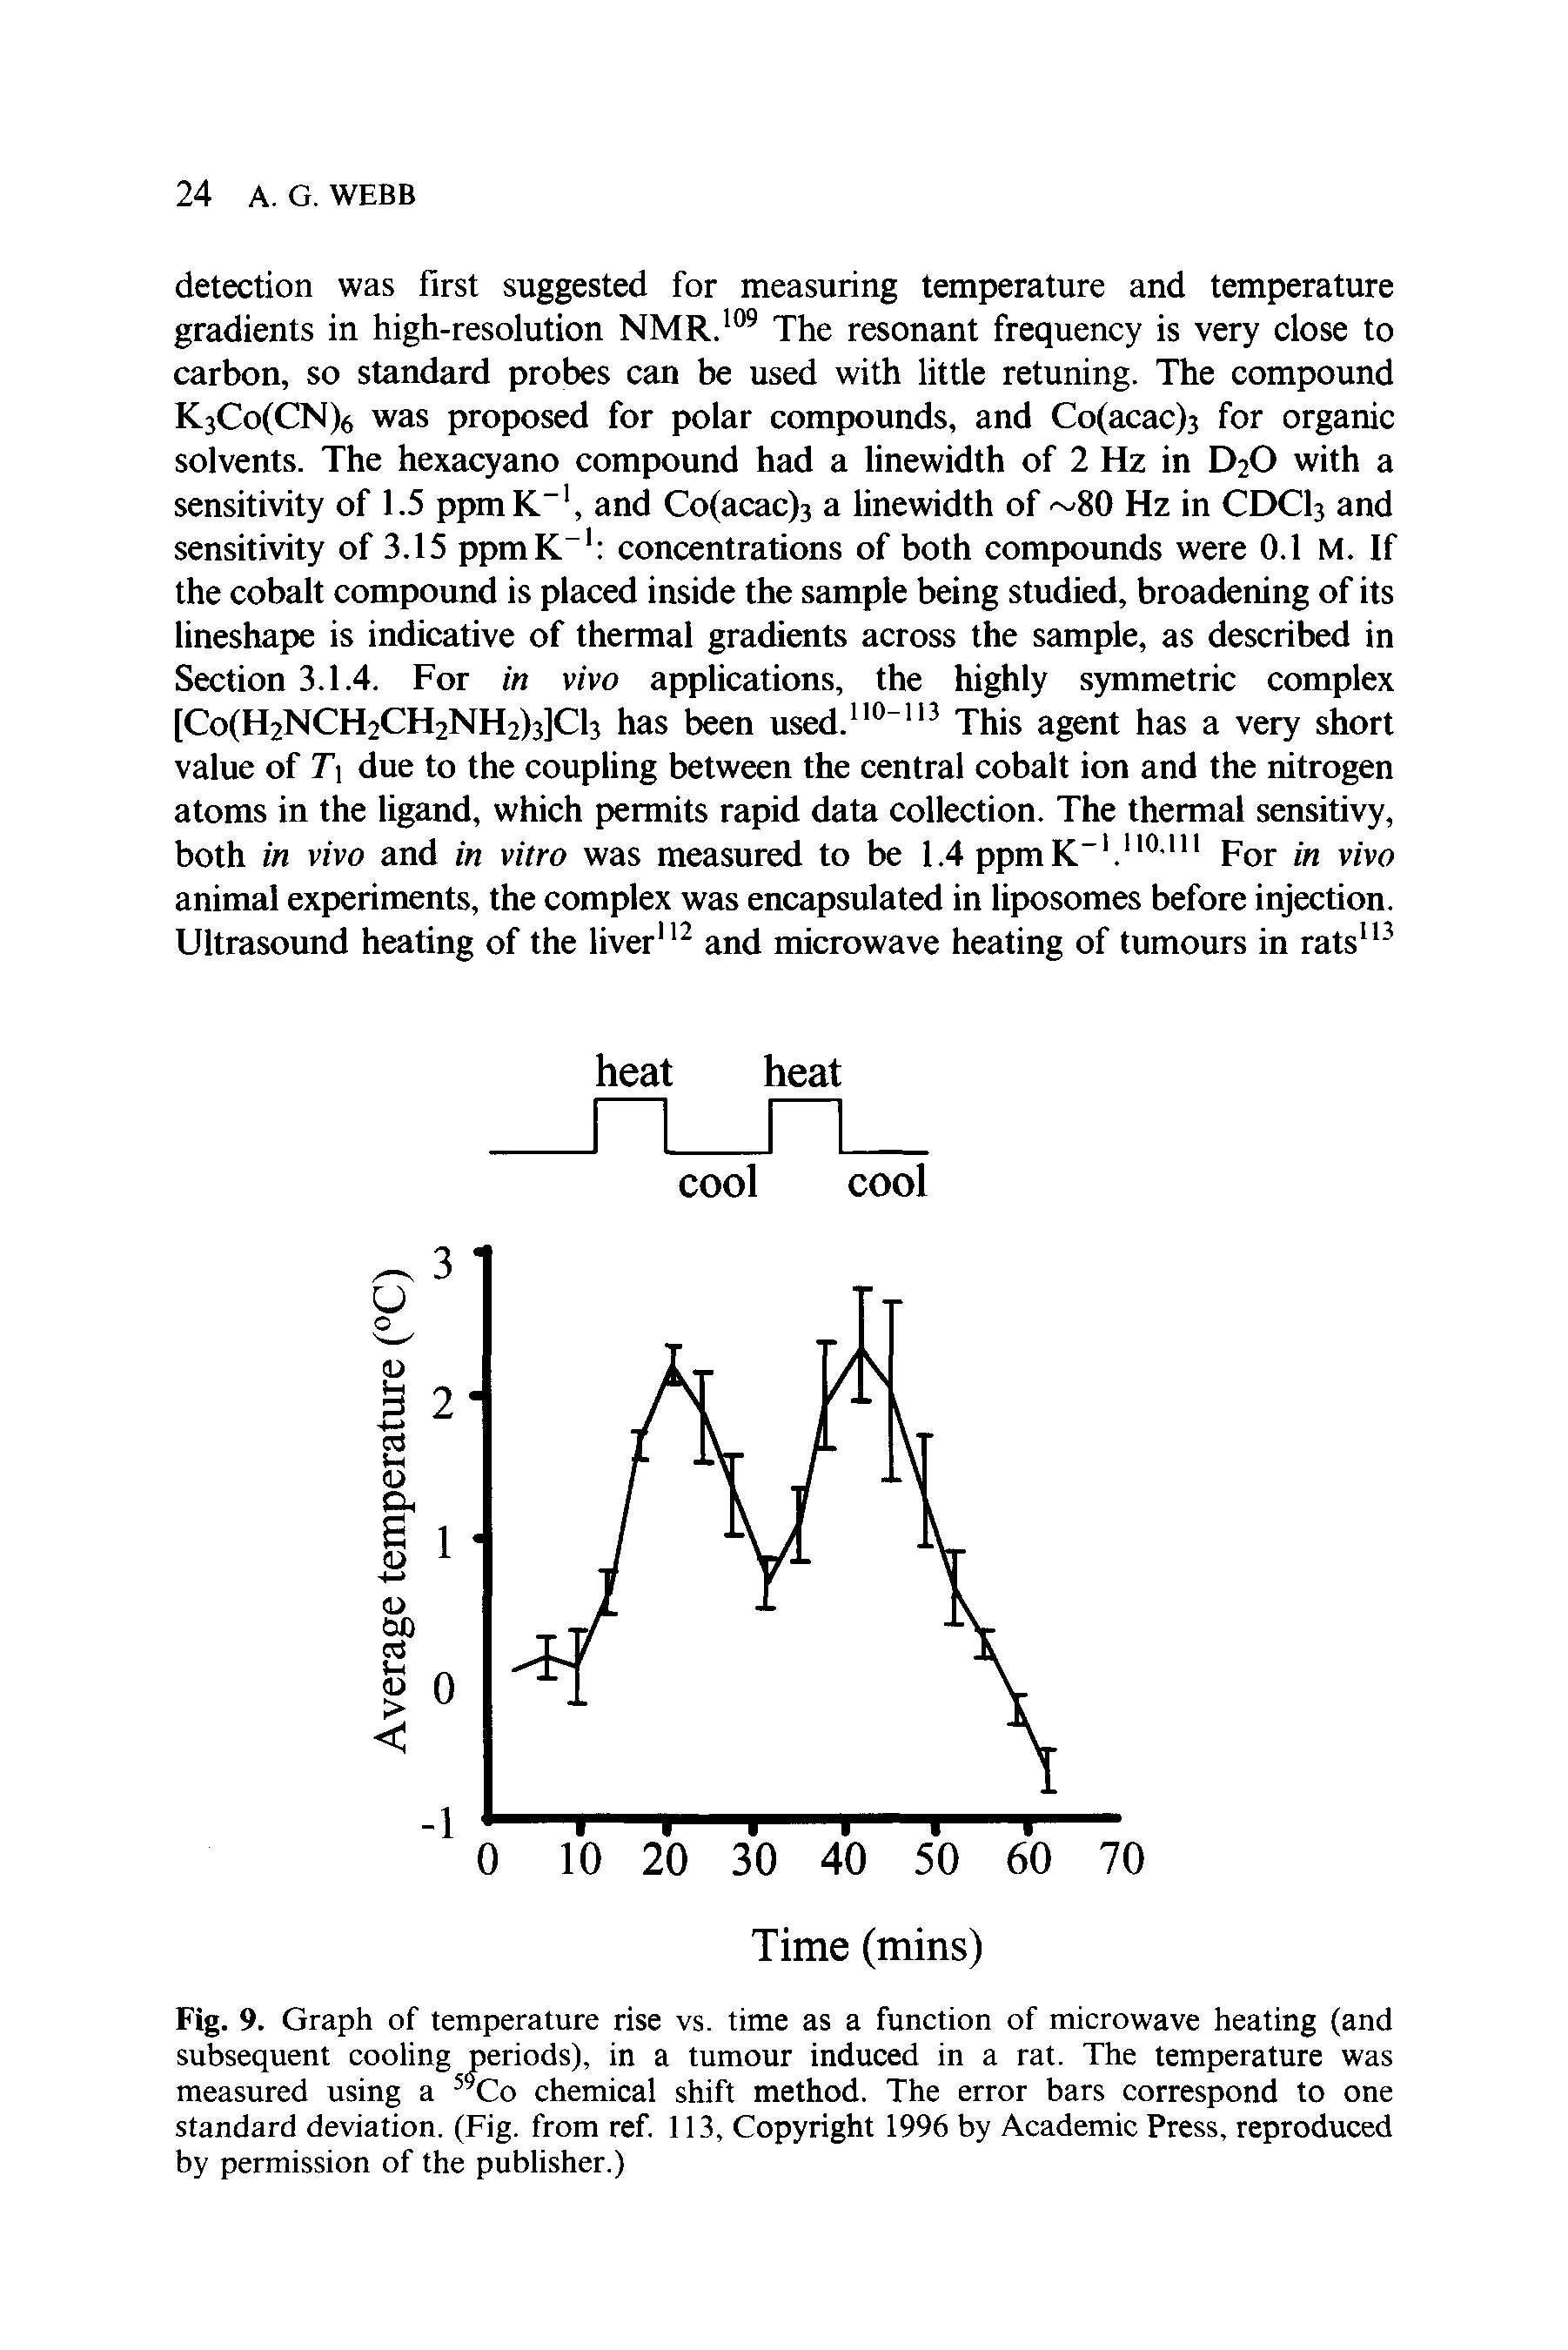 Fig. 9. Graph of temperature rise vs. time as a function of microwave heating (and subsequent cooling periods), in a tumour induced in a rat. The temperature was measured using a Co chemical shift method. The error bars correspond to one standard deviation. (Fig. from ref. 113, Copyright 1996 by Academic Press, reproduced by permission of the publisher.)...